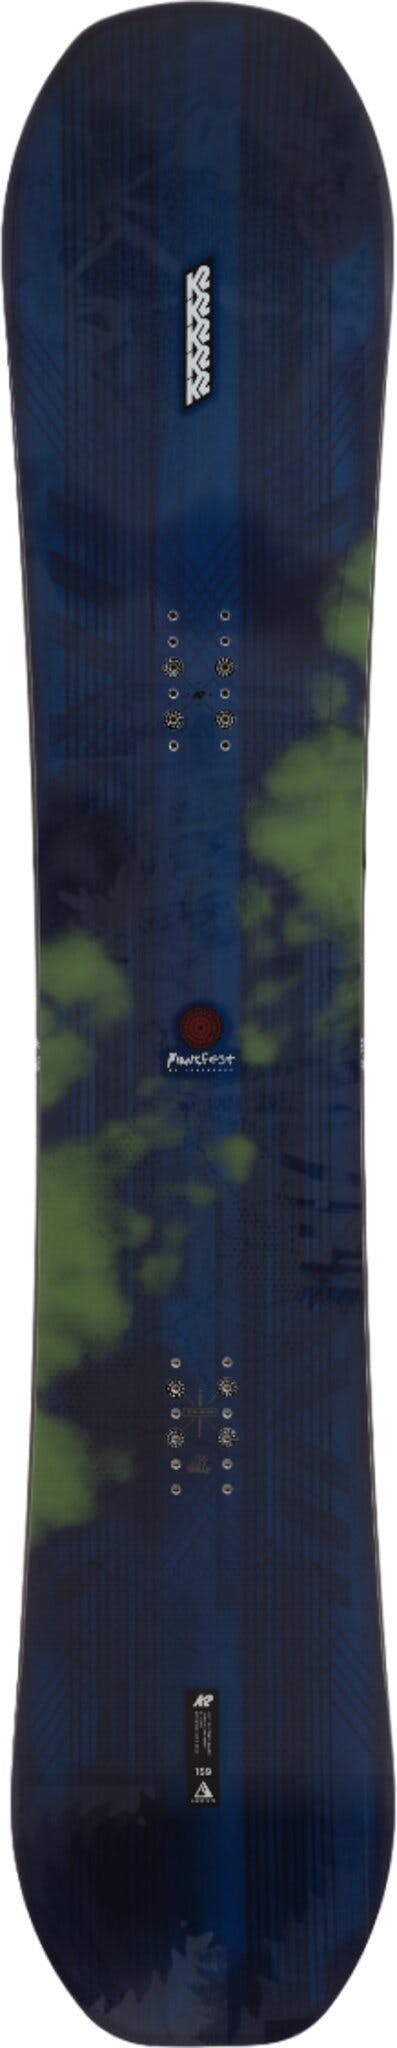 Product image for Manifest Snowboard - Men's